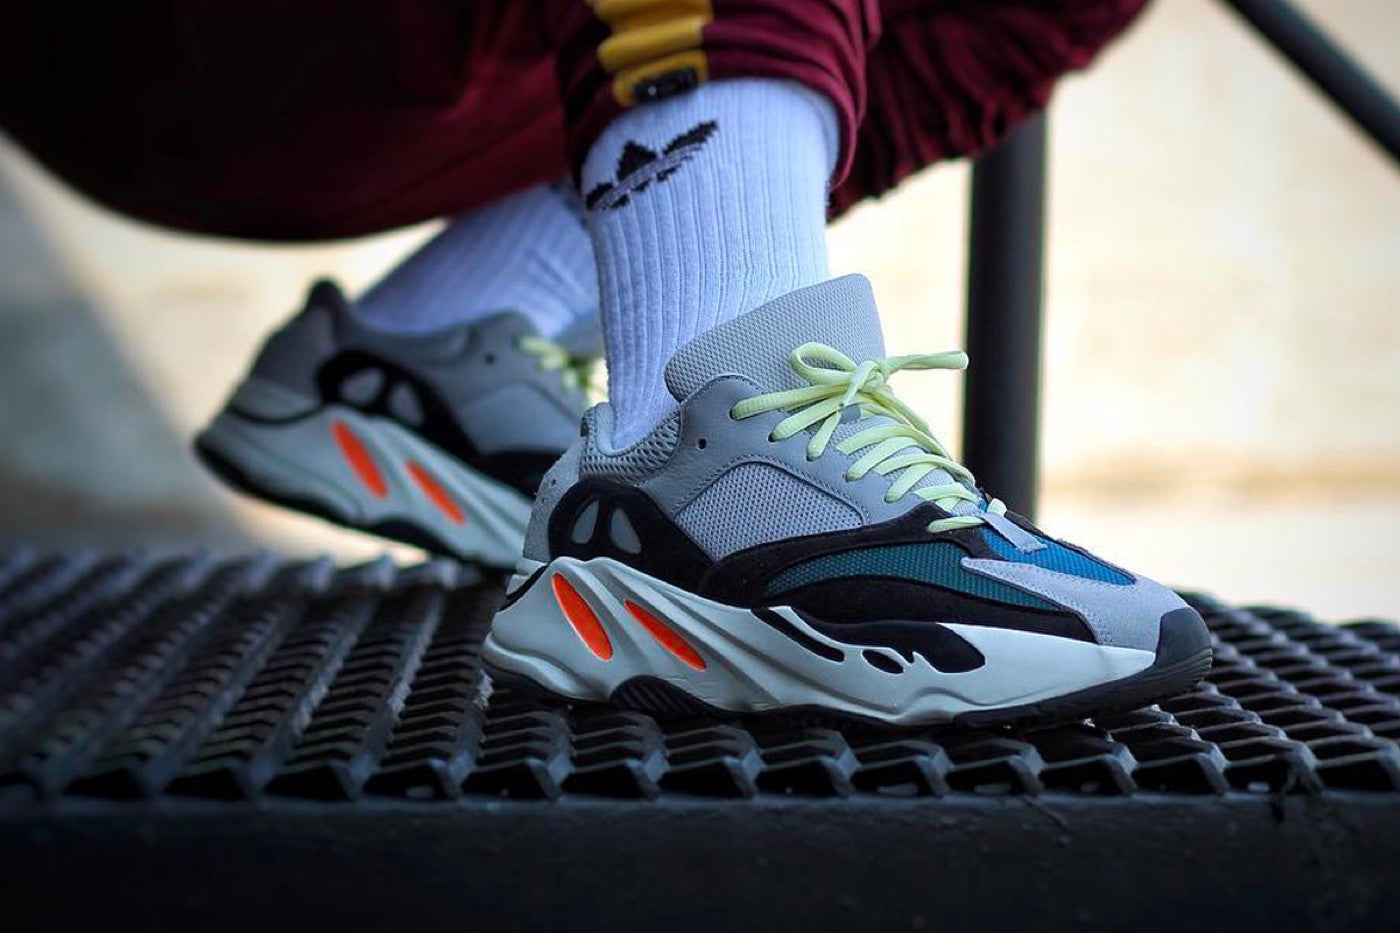 The Yeezy Boost 700 